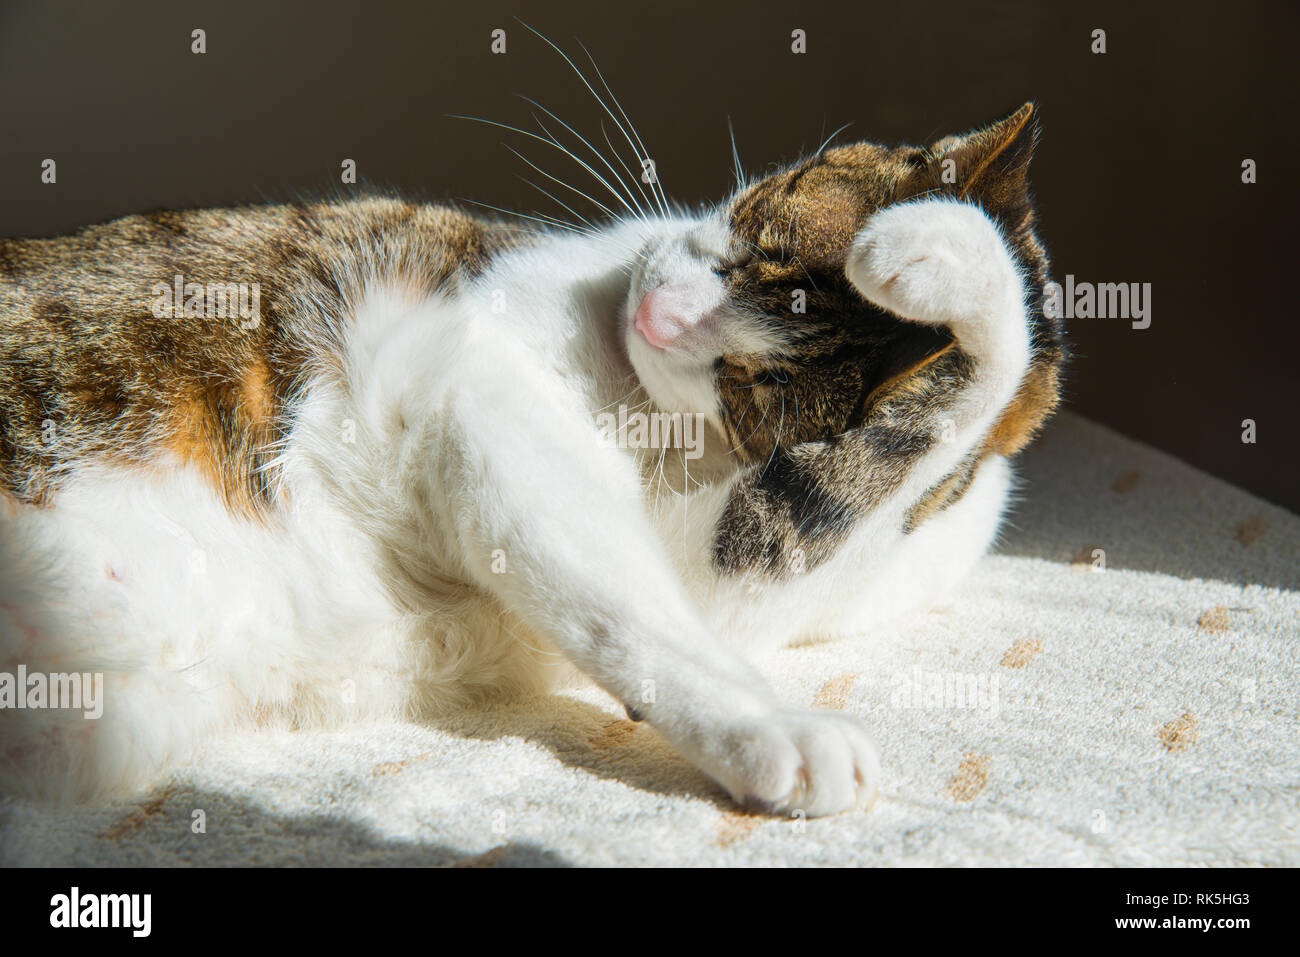 Tabby and white cat cleaning himself. Stock Photo